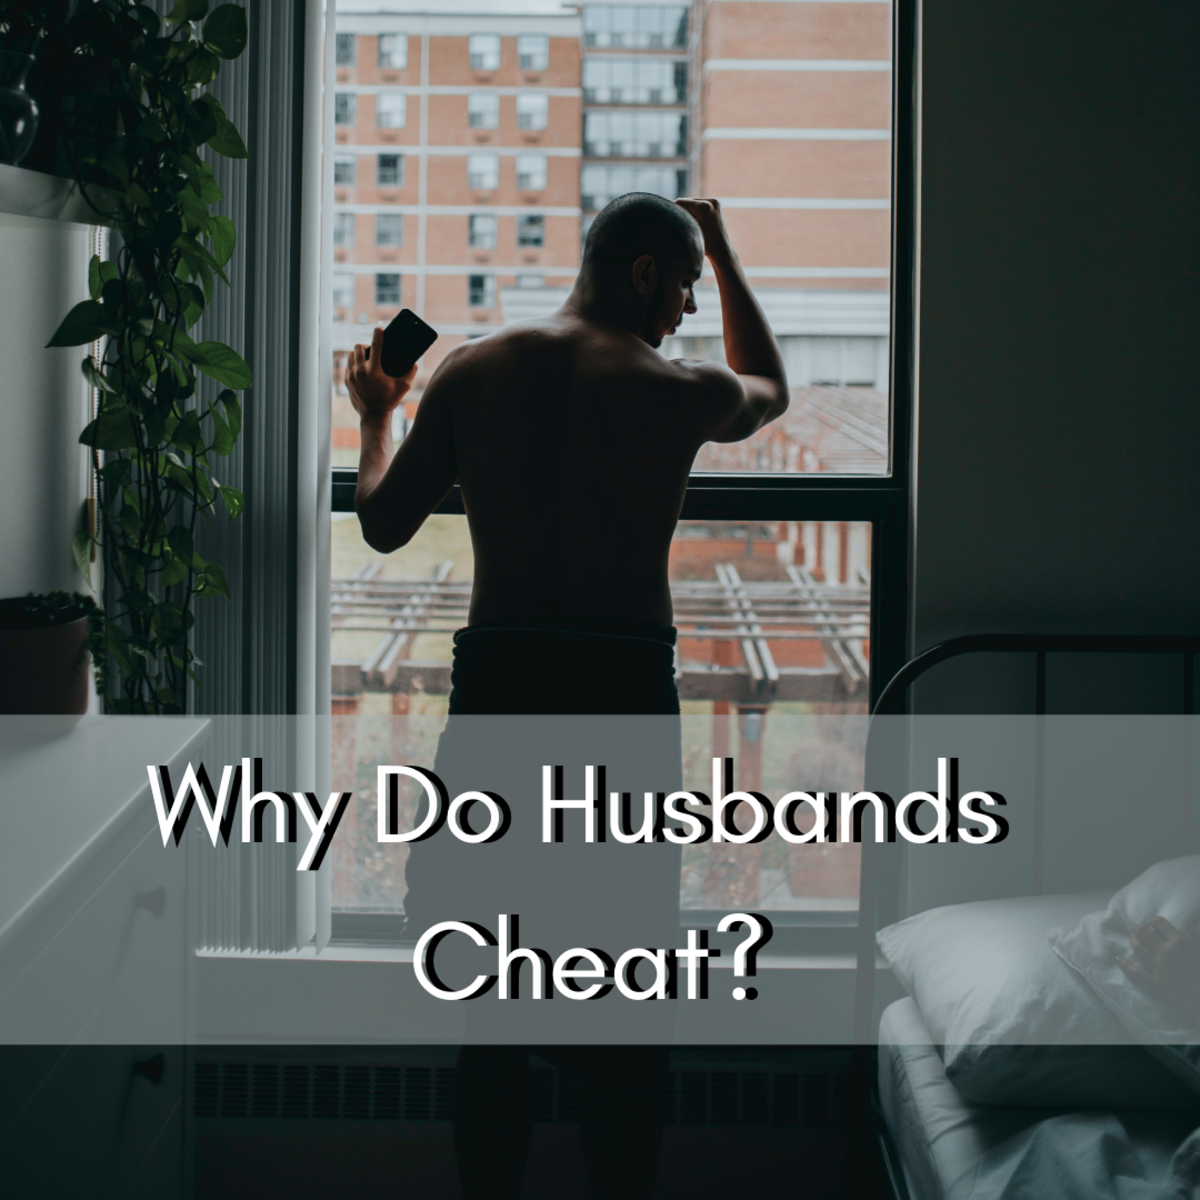 Why do they cheat? Who is to blame? Read on to learn more.